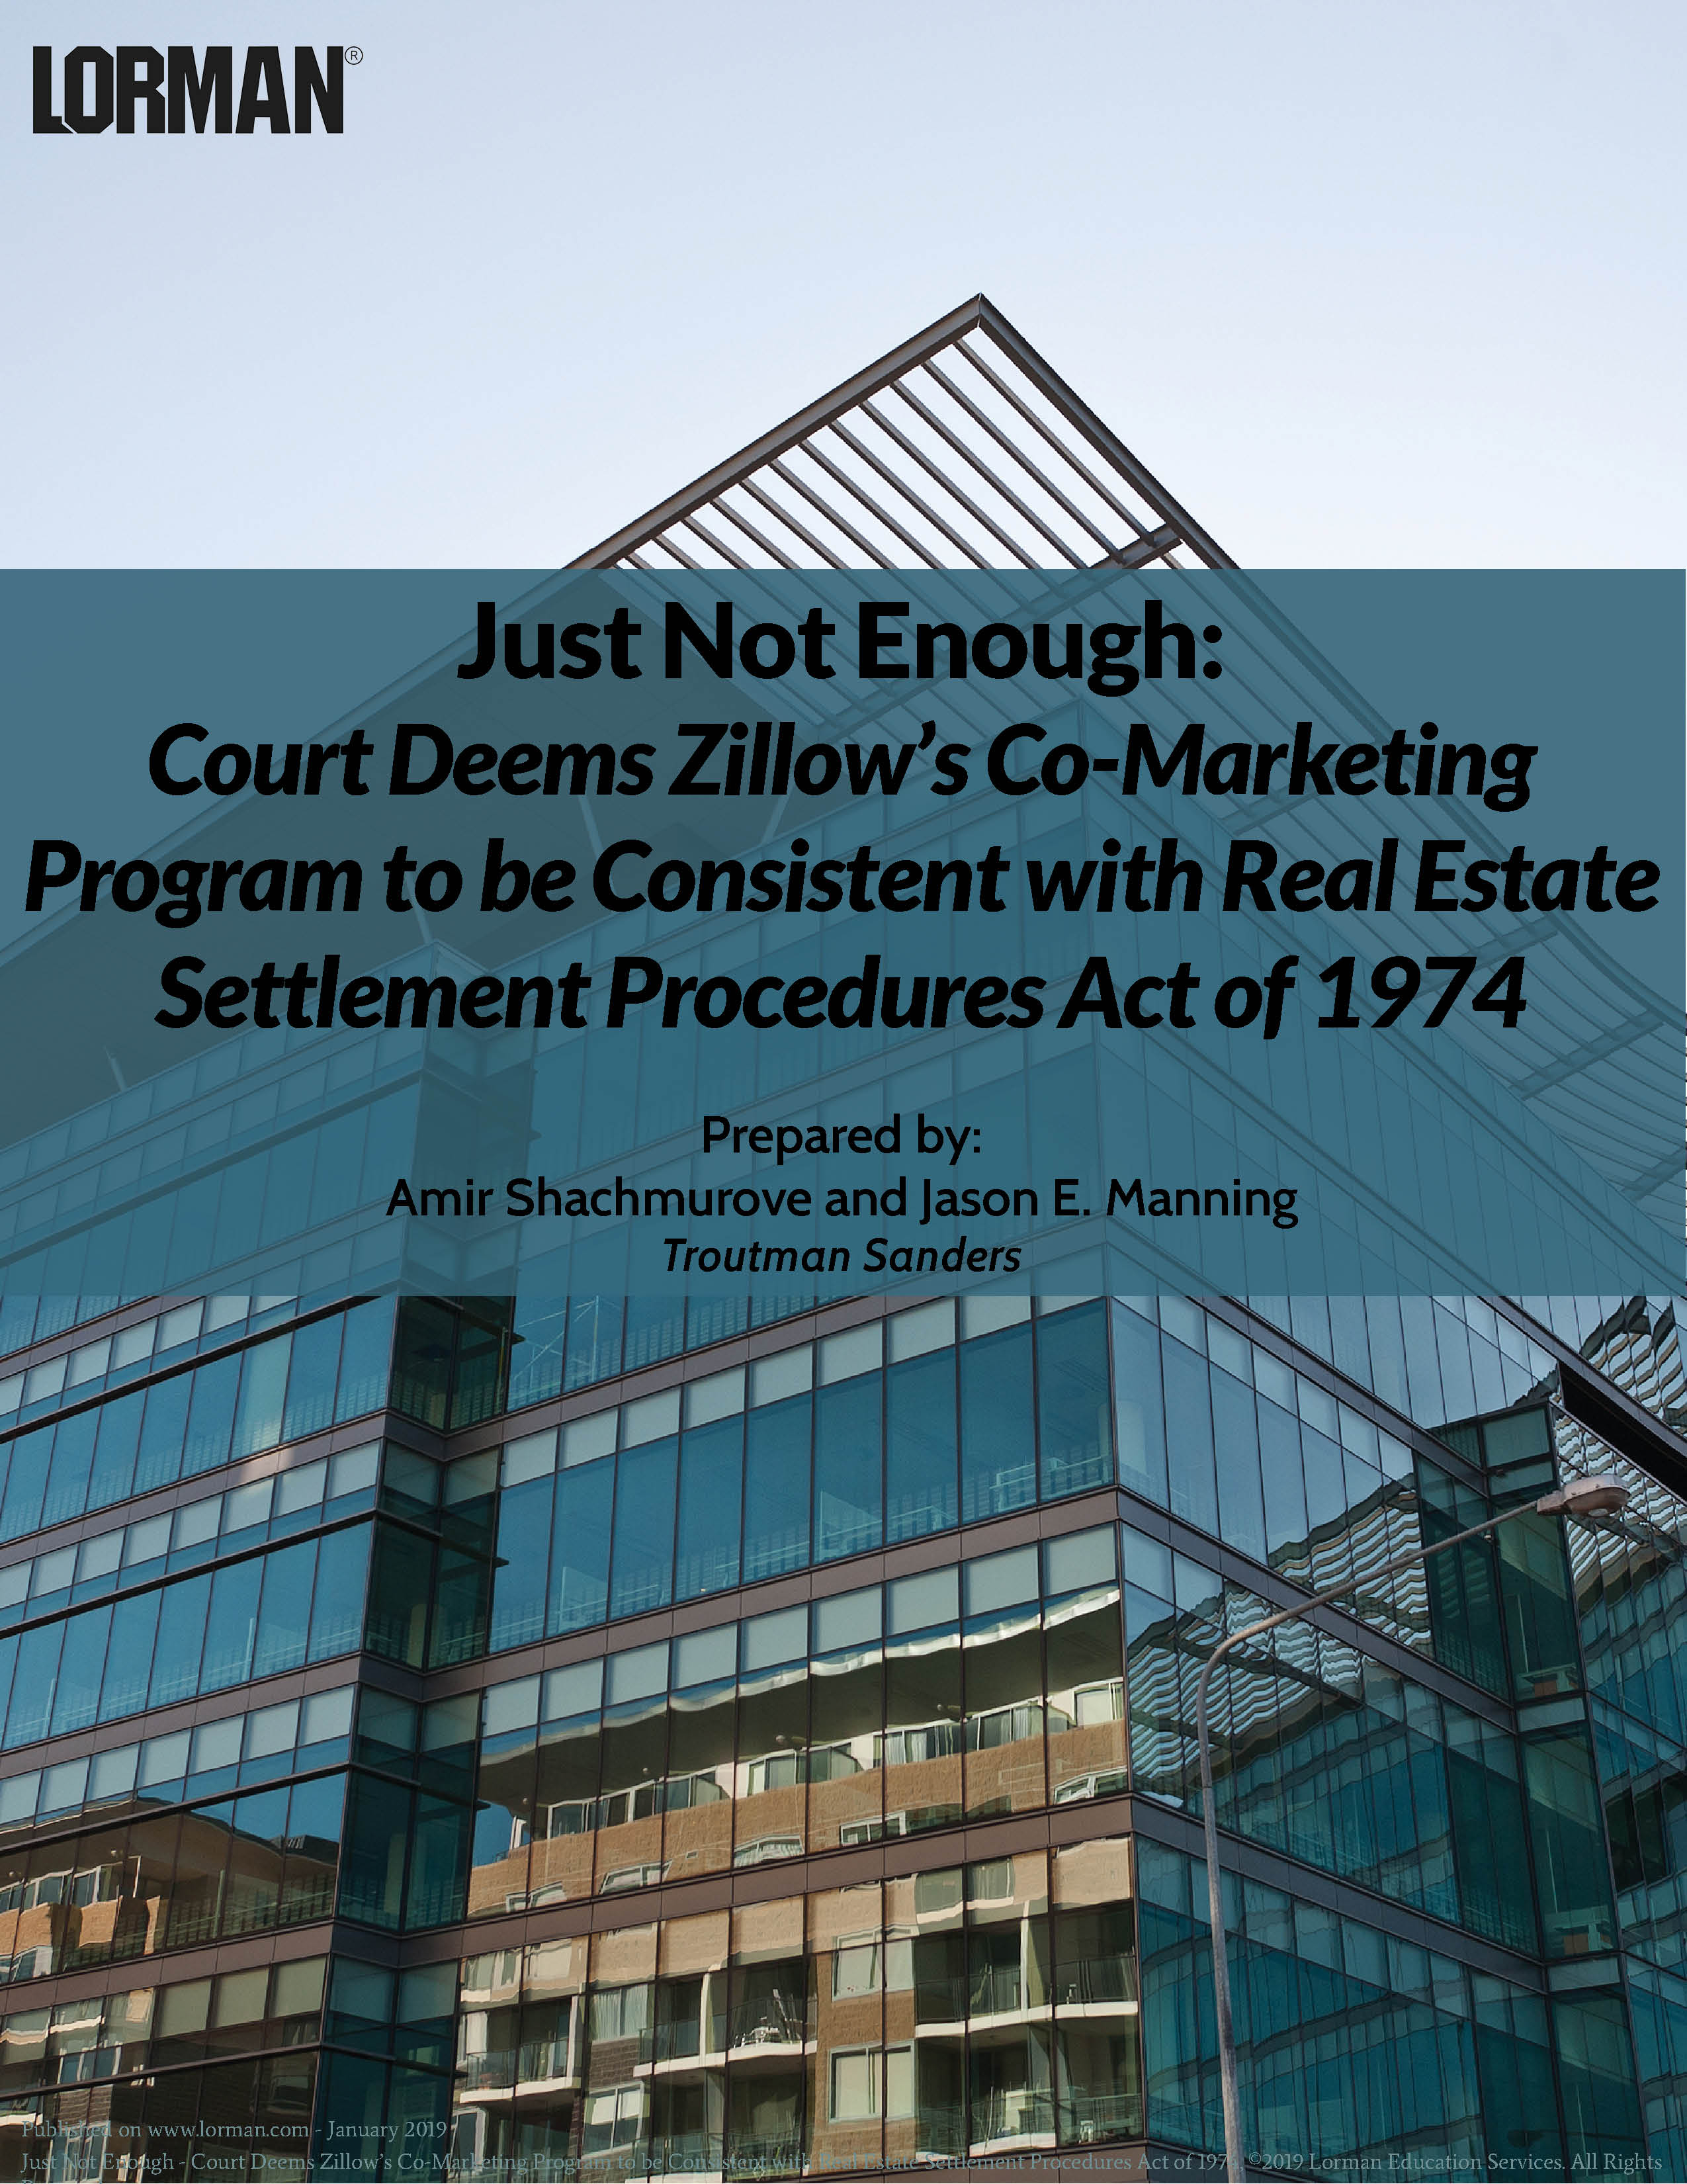 Just Not Enough - Court Deems Zillow’s Co-Marketing Program to be Consistent with RESPA